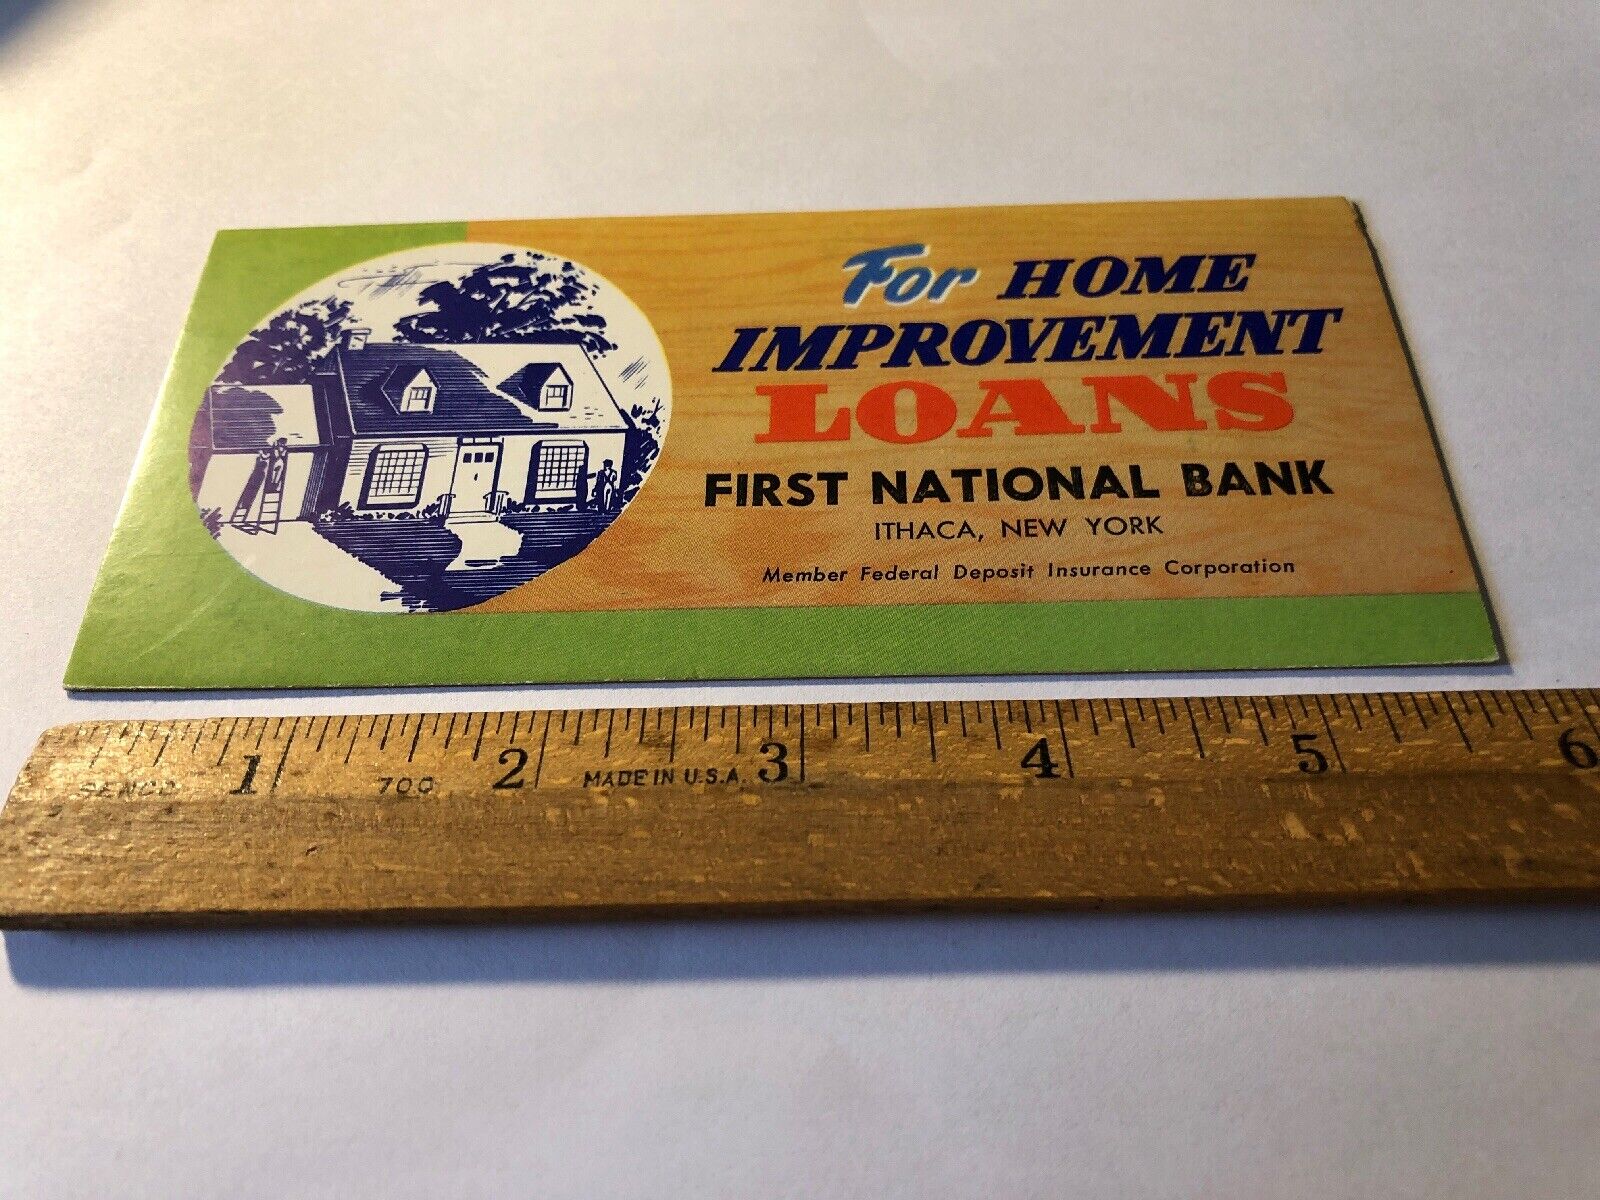 Vintage Advertising Ink Blotter First National Bank Ithaca NY Loans WWII era